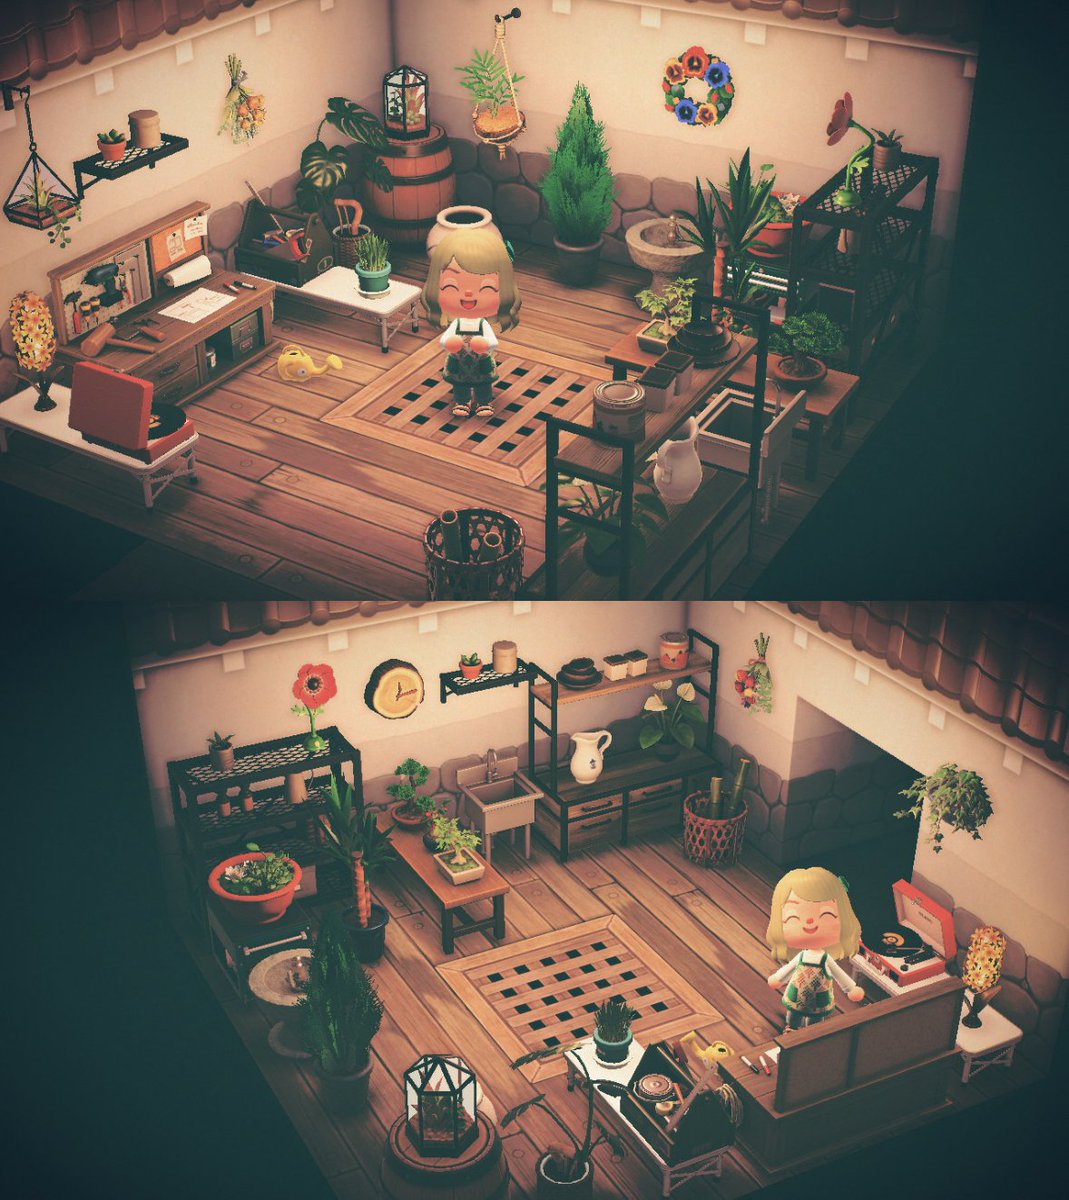 184. Une pièce florale !(Source :  https://www.reddit.com/r/AnimalCrossing/comments/gzftzh/really_excited_about_my_garden_room/)